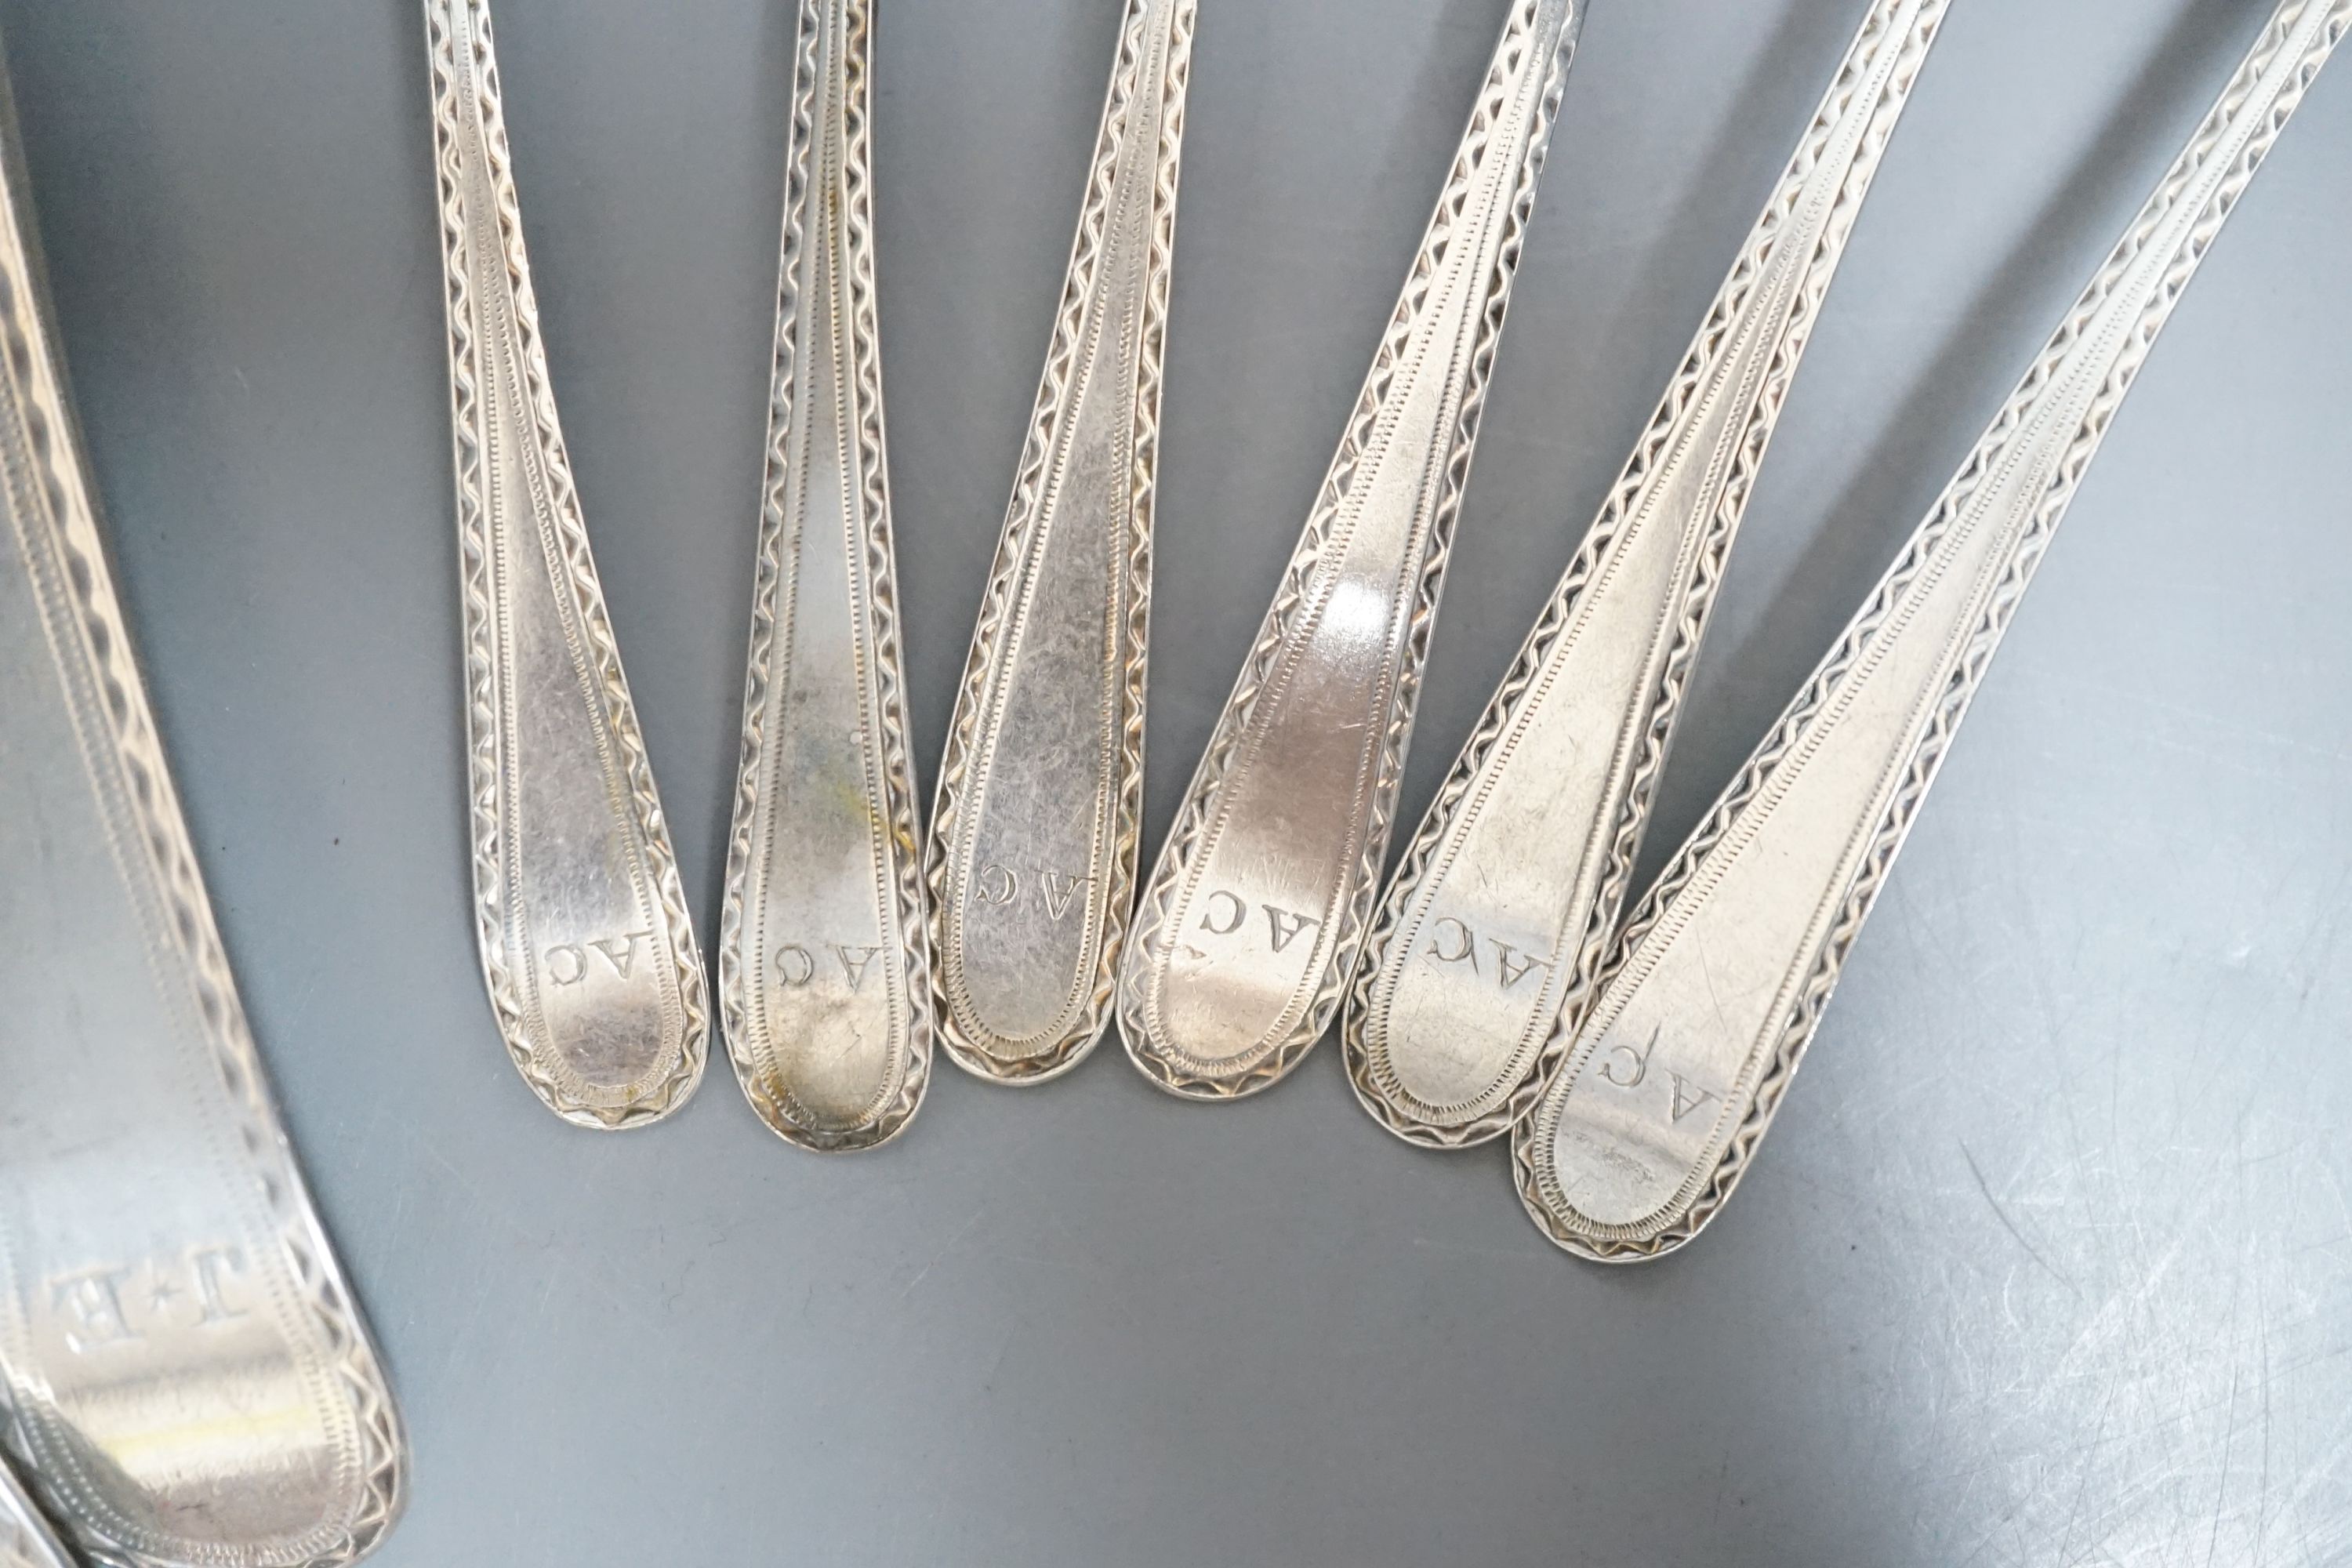 A set of silver George III bright cut engraved silver Old English pattern teaspoons, by Hester Bateman, no date letter and a pair of George III silver bright cut engraved Old English tablespoons, London, 1787